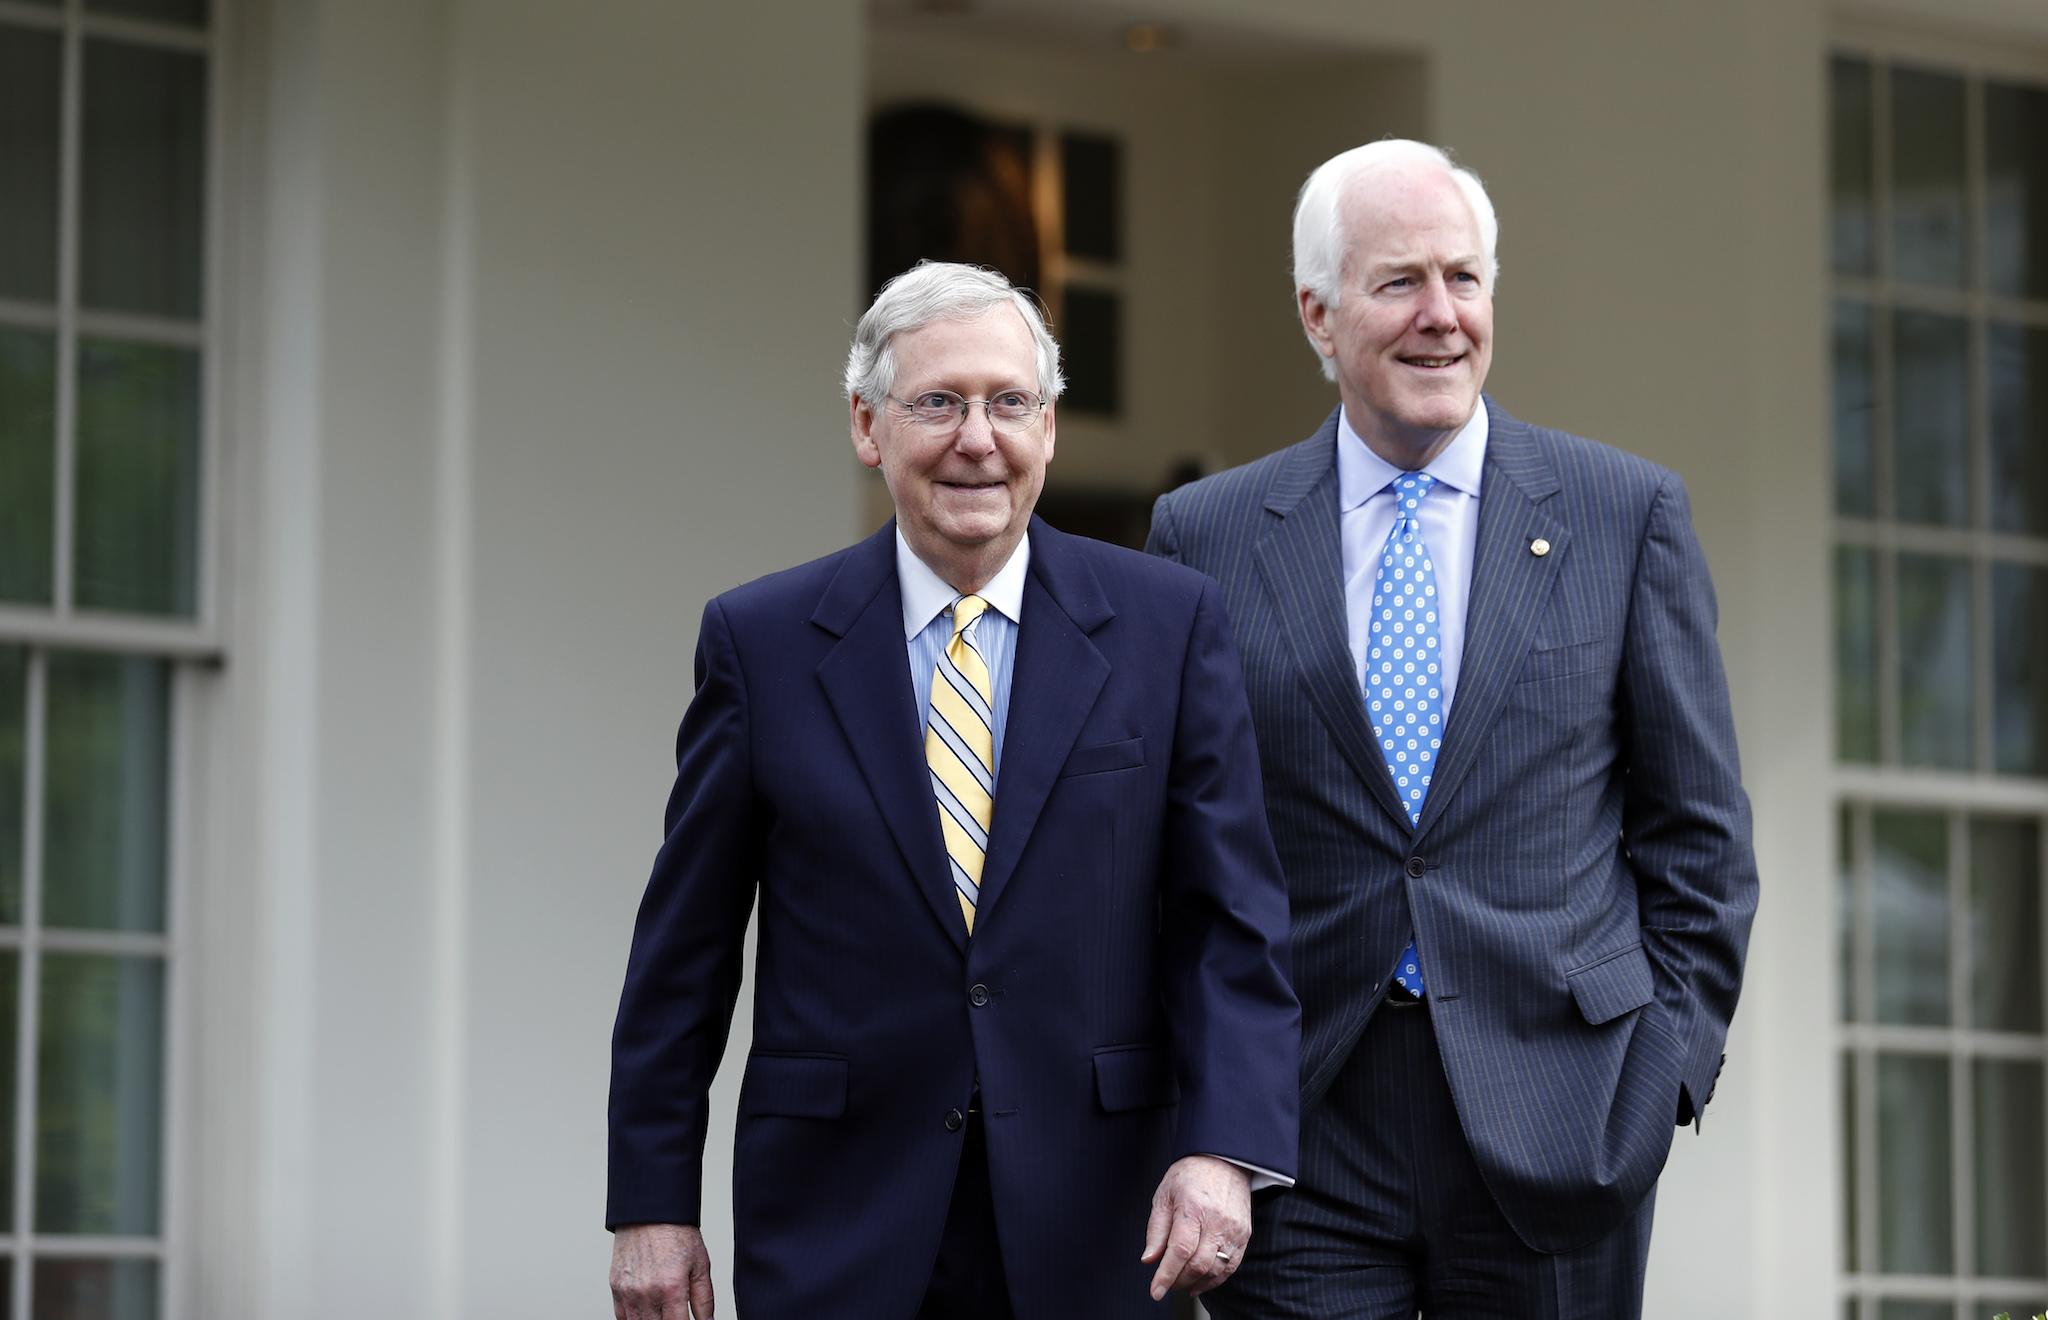 Senate Majority Leader Mitch McConnell and Senate Majority Whip John Cornyn walk to speak with the media after they and other Senate Republicans had a meeting with President Donald Trump at the White House